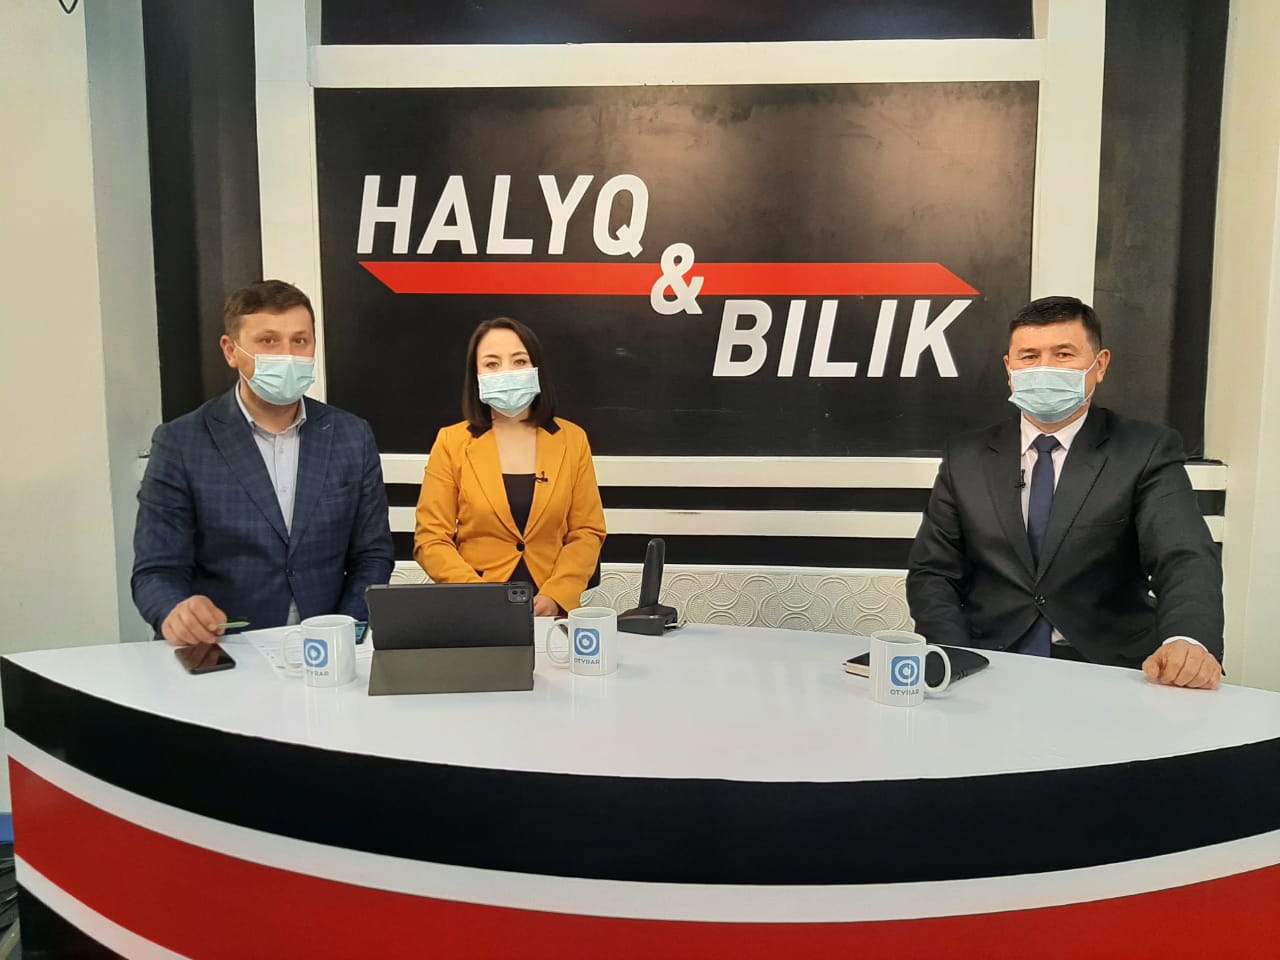 On April 12, 2021, the director of the Professional orientation centre of M. Auezov South Kazakhstan University, Murat Aitureev, participated in the live broadcast of the program &quot;HALYQ &amp; BILIK &quot;of the Otyrar TV channel. 